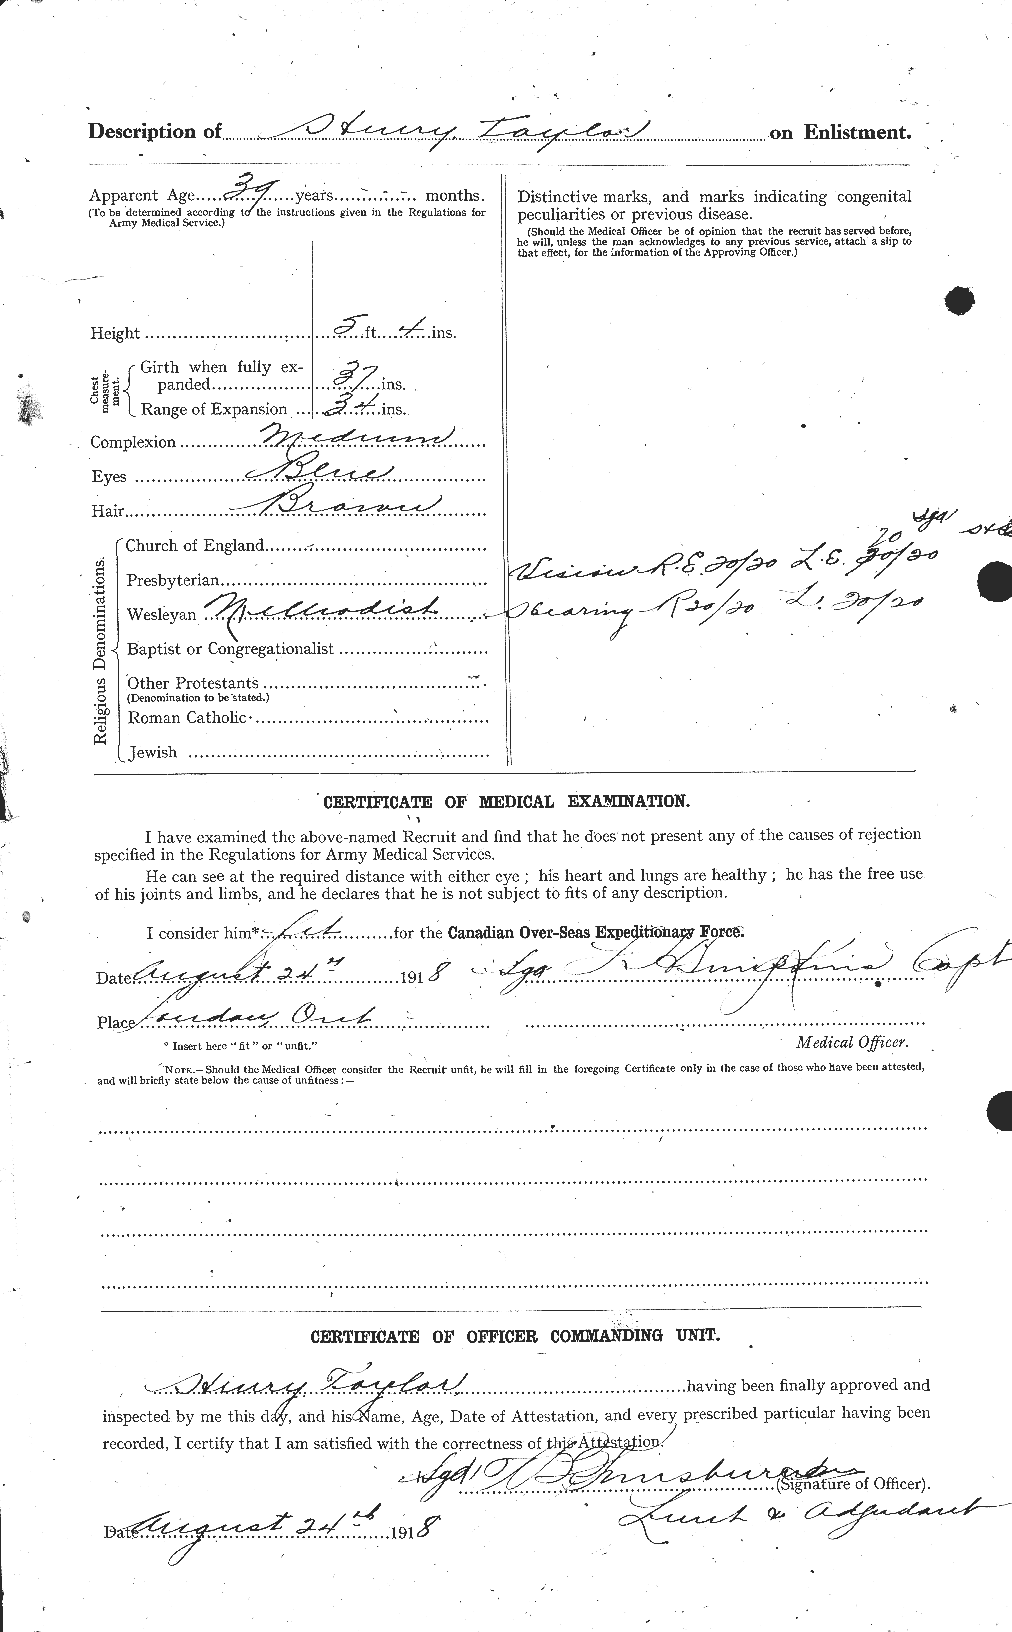 Personnel Records of the First World War - CEF 626524b